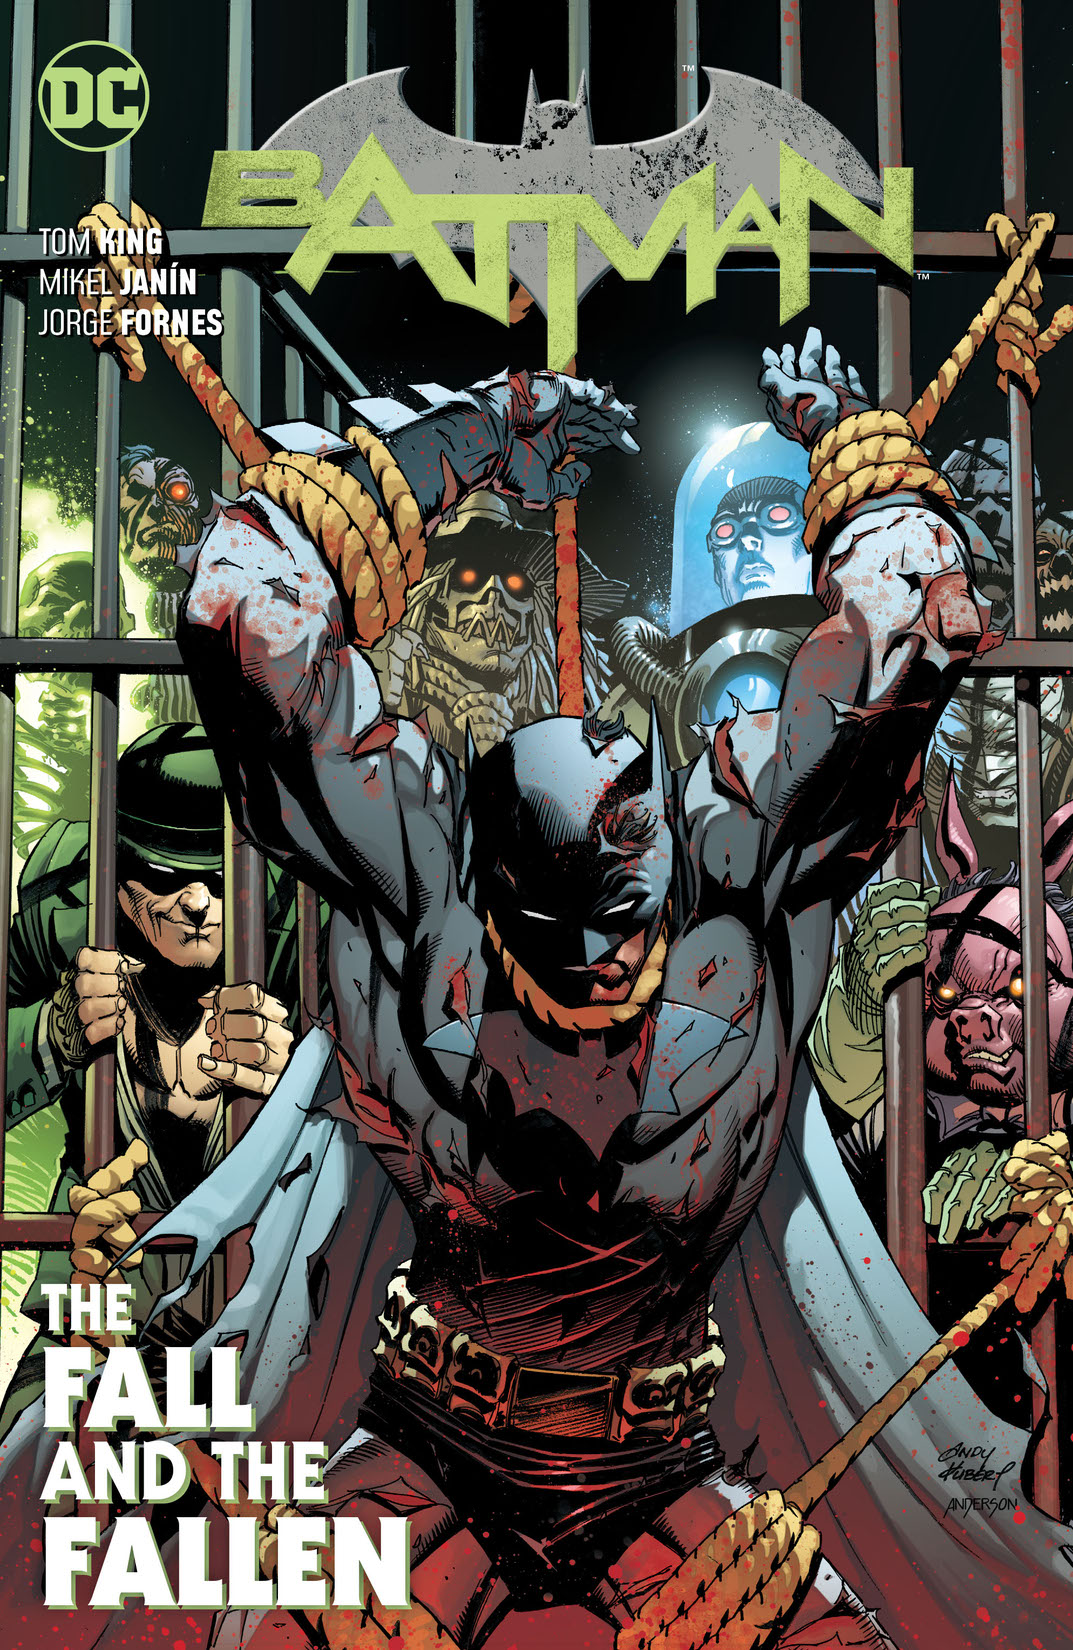 Batman Vol. 11: The Fall and the Fallen preview images